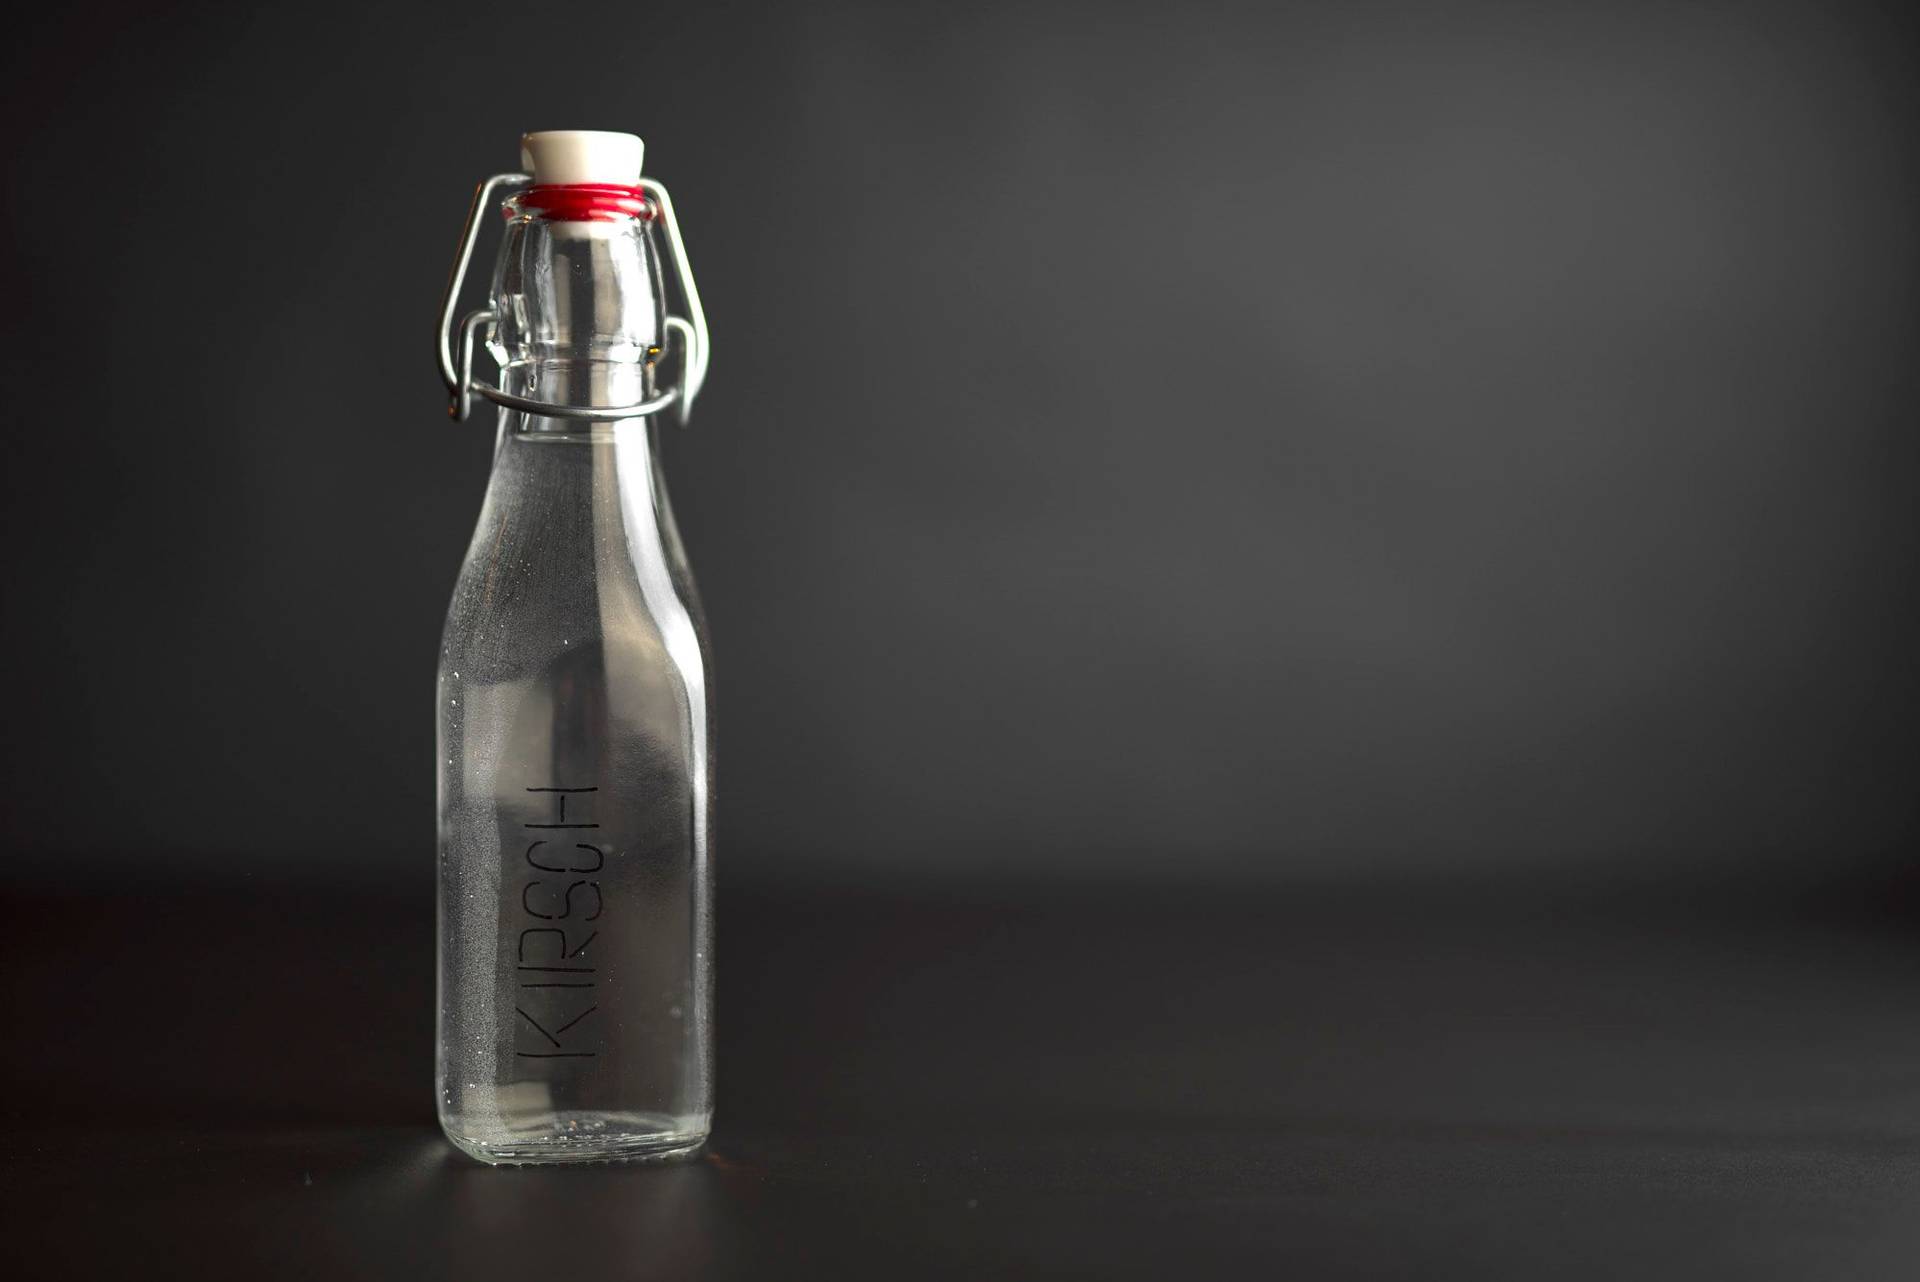 kirsch liquor in a glass bottle with black background